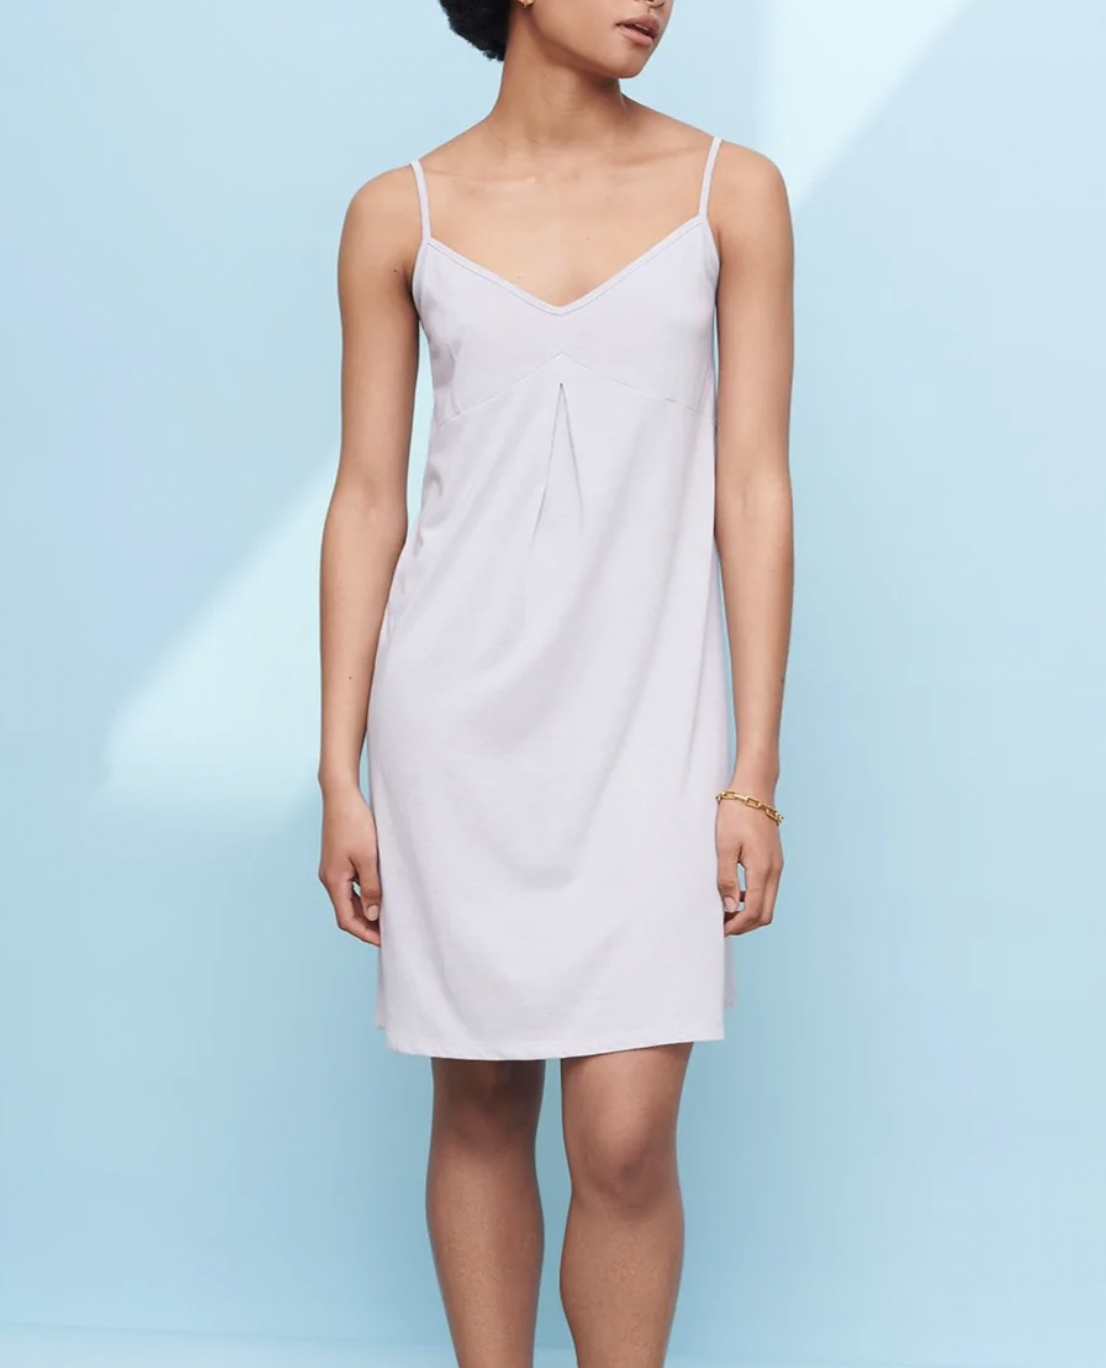 CAMI NIGHTDRESS IN SILVER from Cucumber.